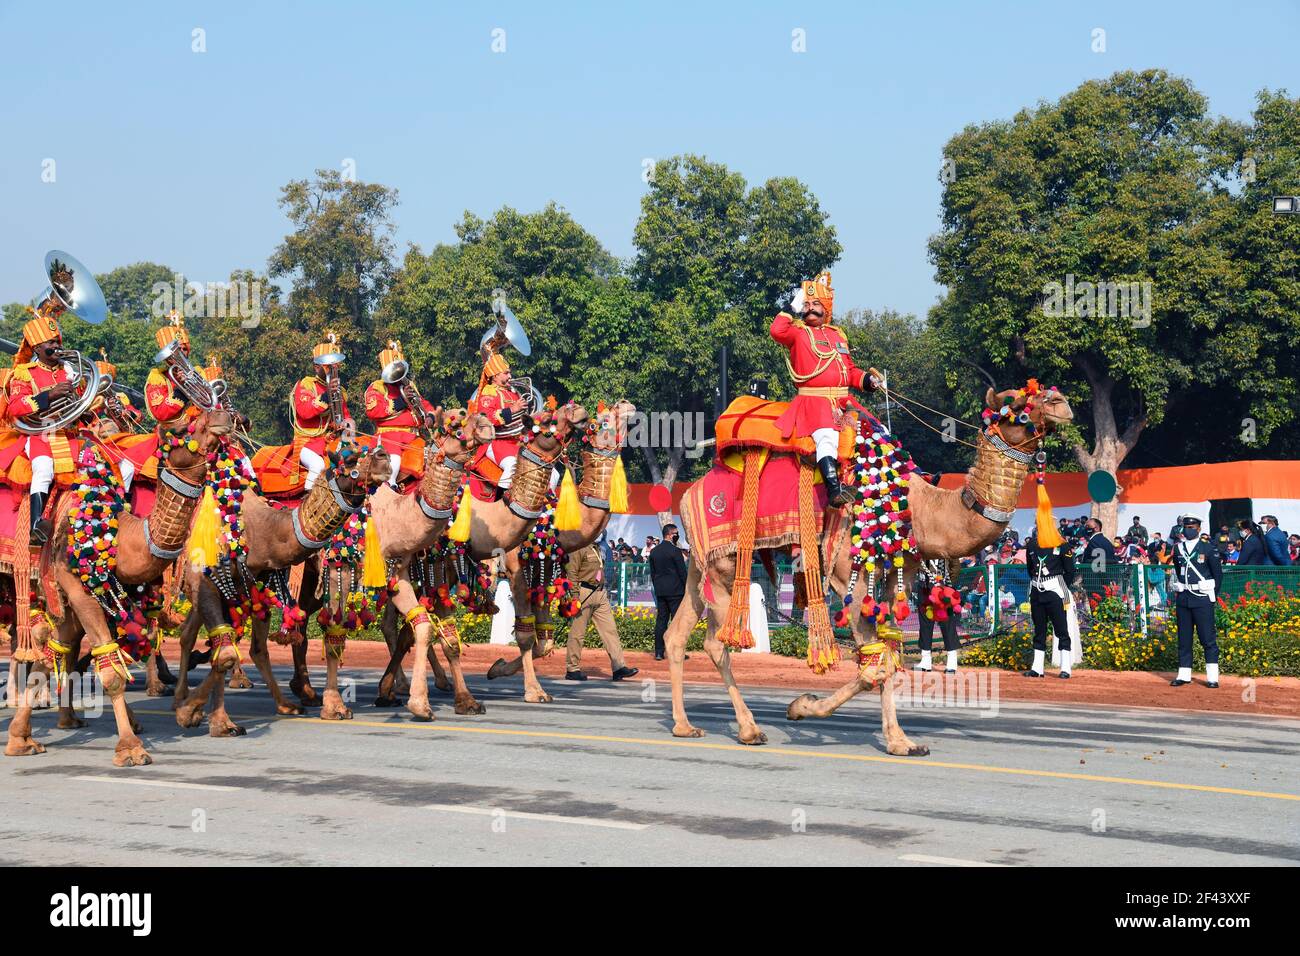 Camel band of Border security Force, India Stock Photo